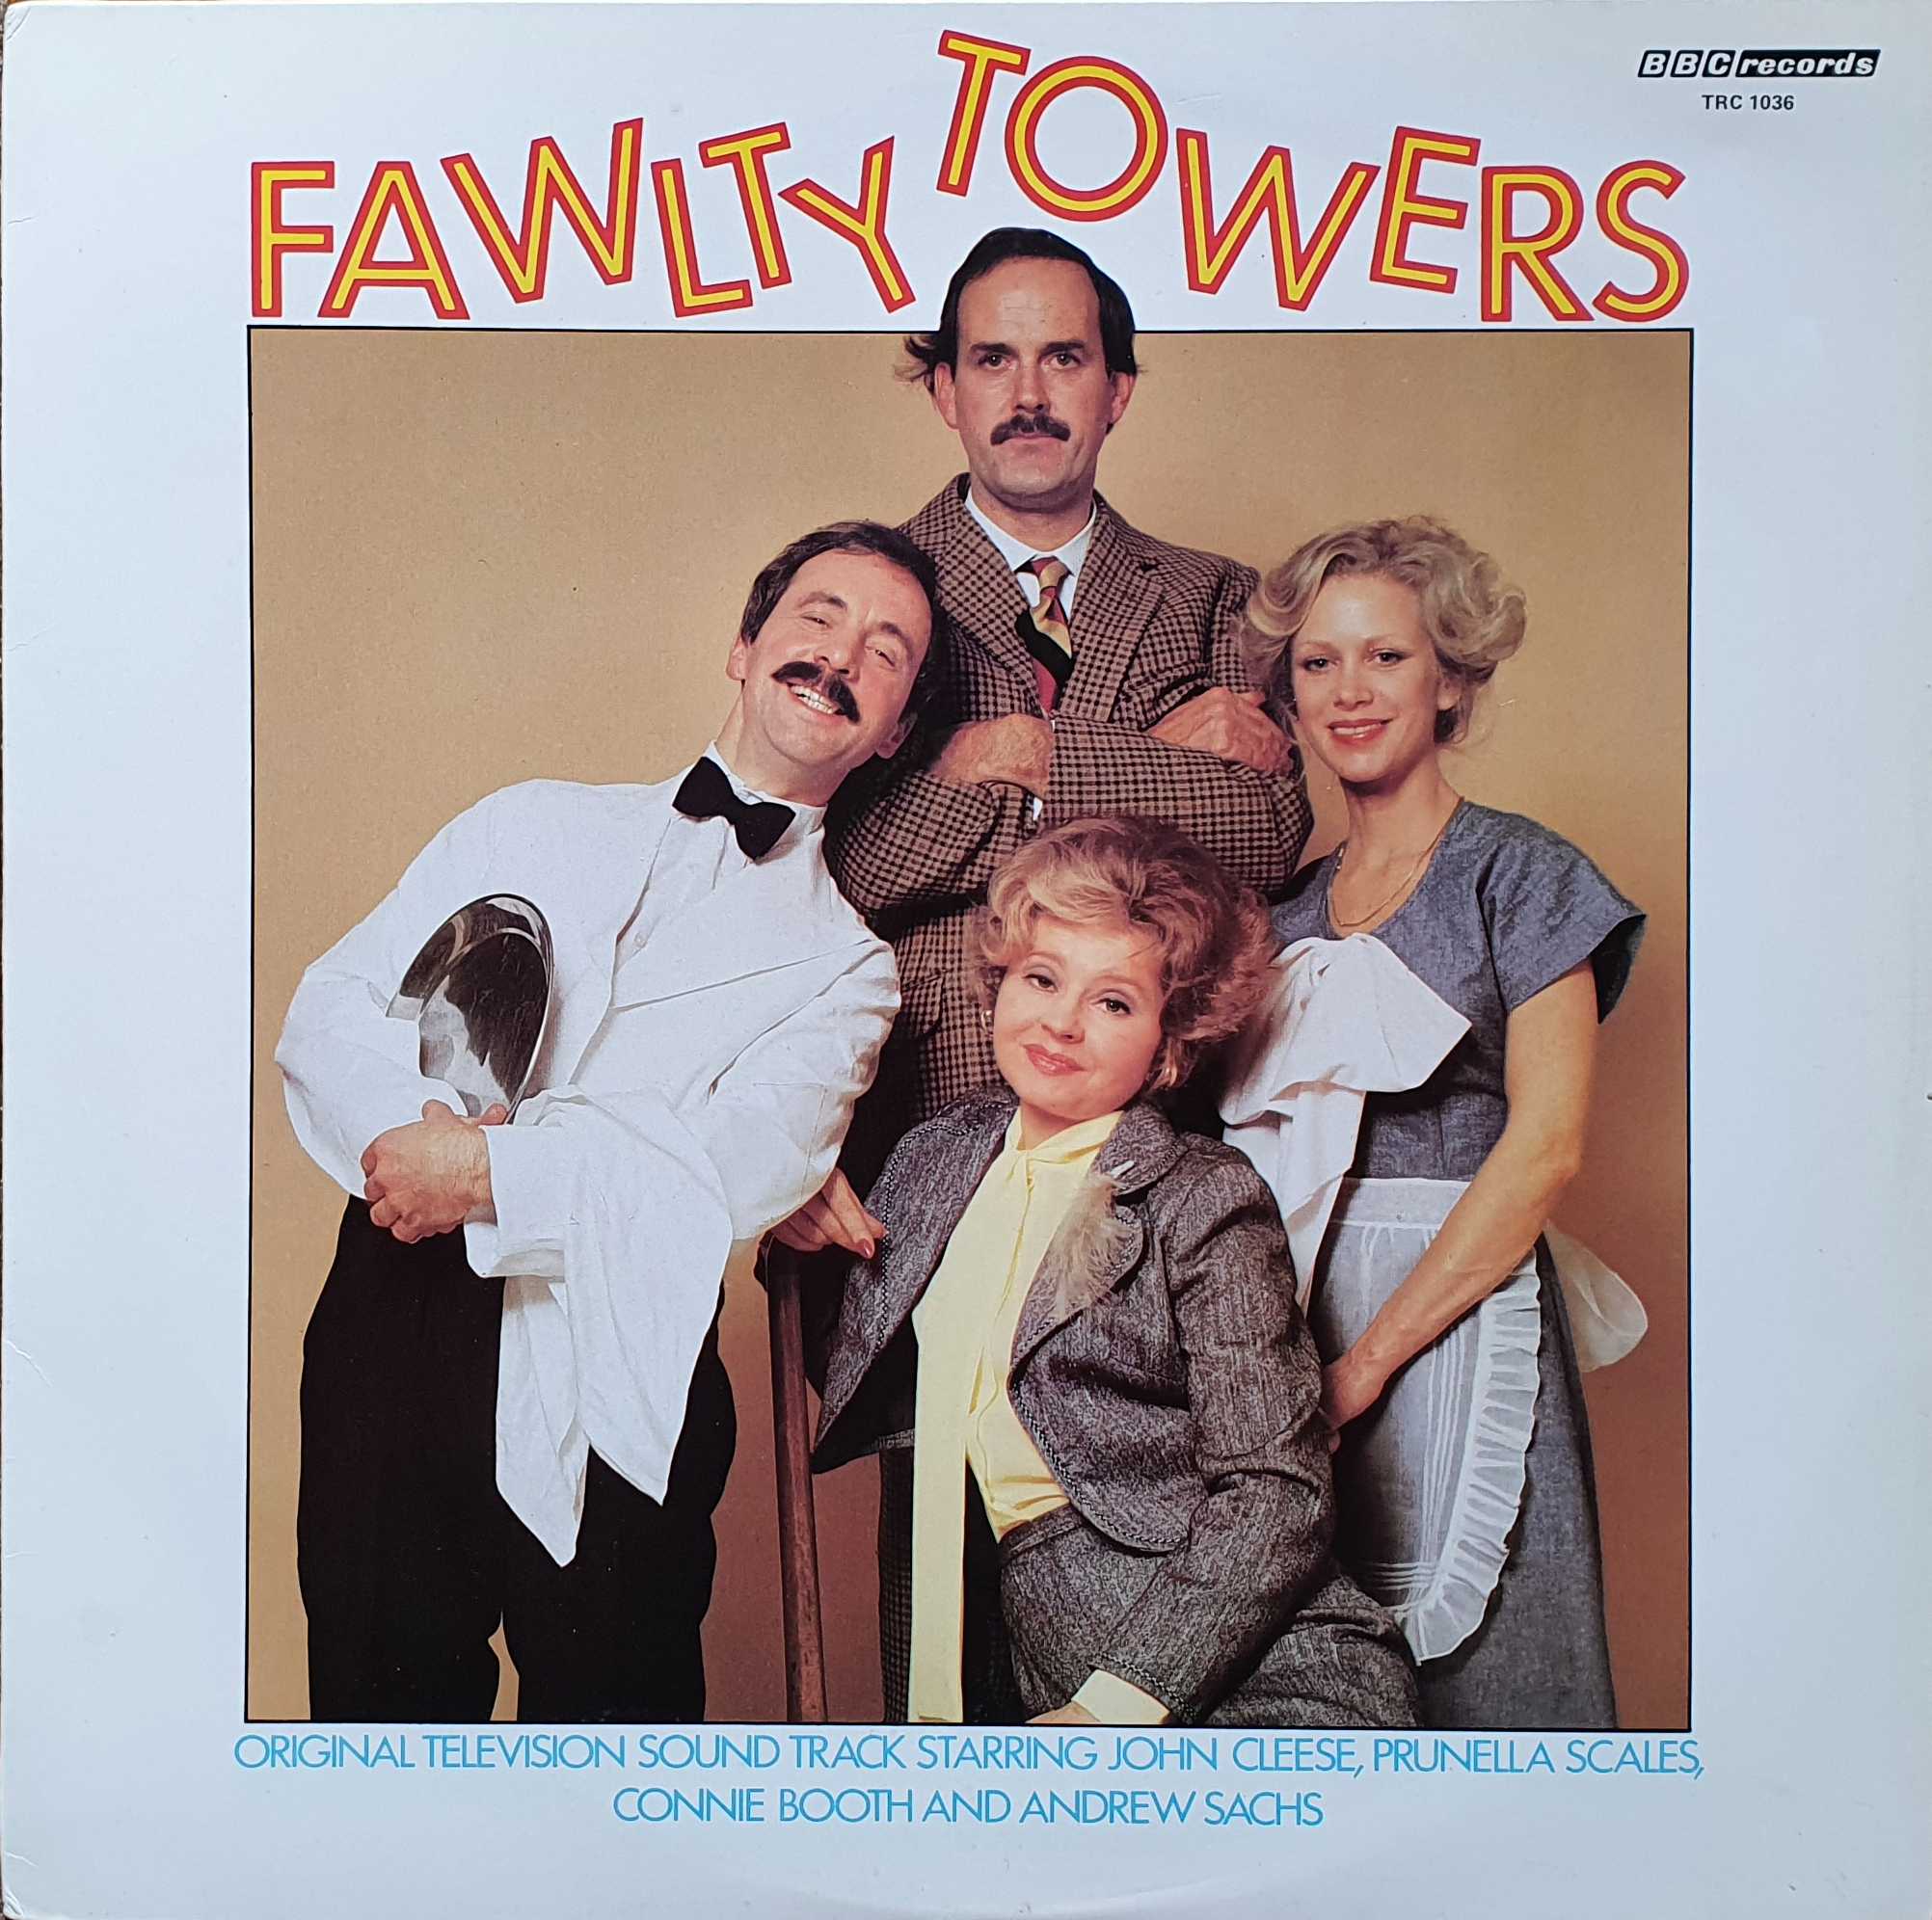 Picture of TRC - 1036 Fawlty Towers (Canadian import) by artist John Cleese / Connie Booth from the BBC albums - Records and Tapes library